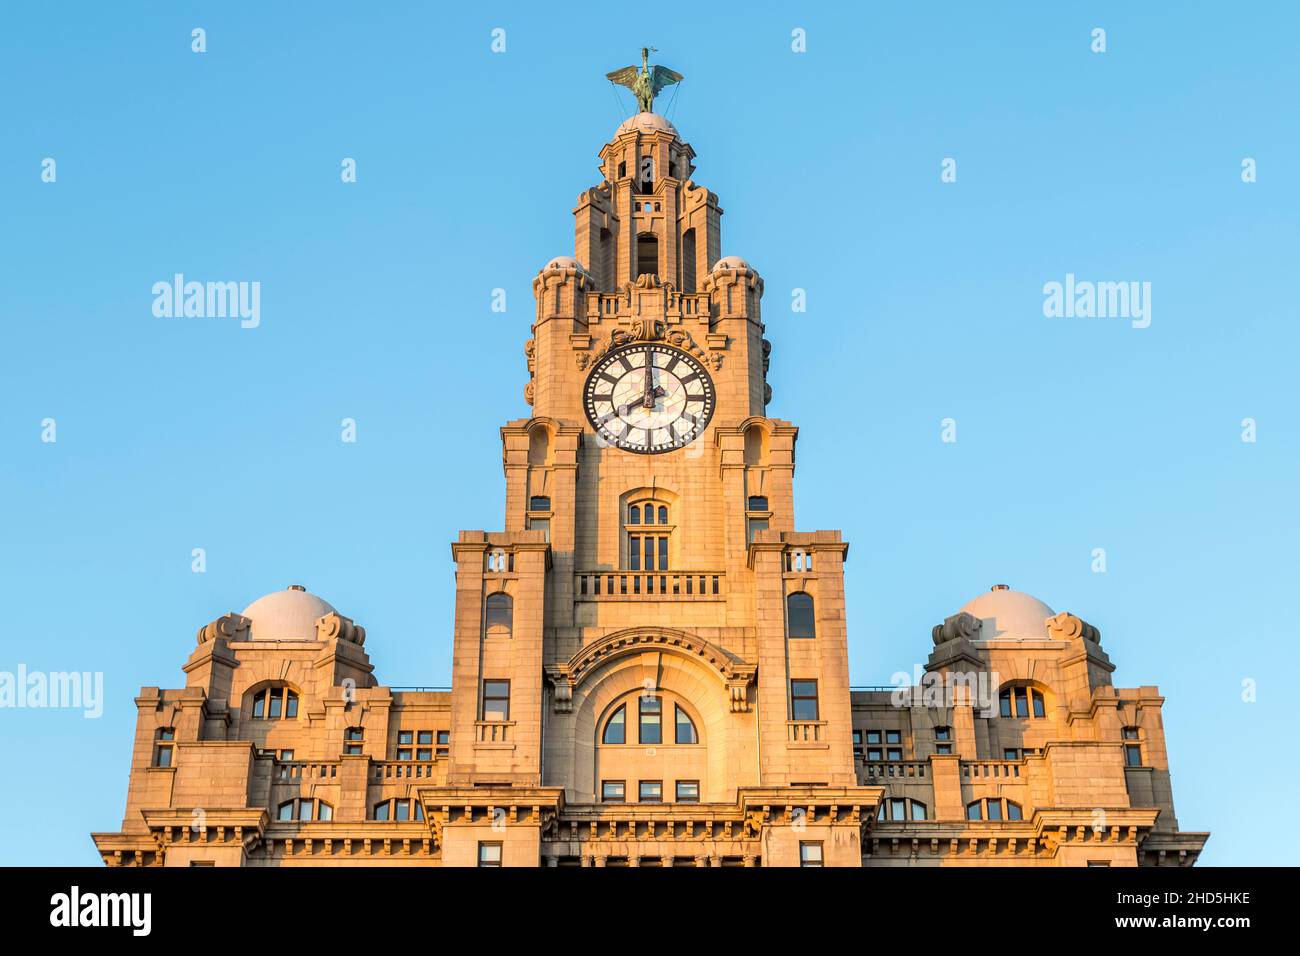 Looking up at one of the clock towers on the Royal Liver Building. Stock Photo